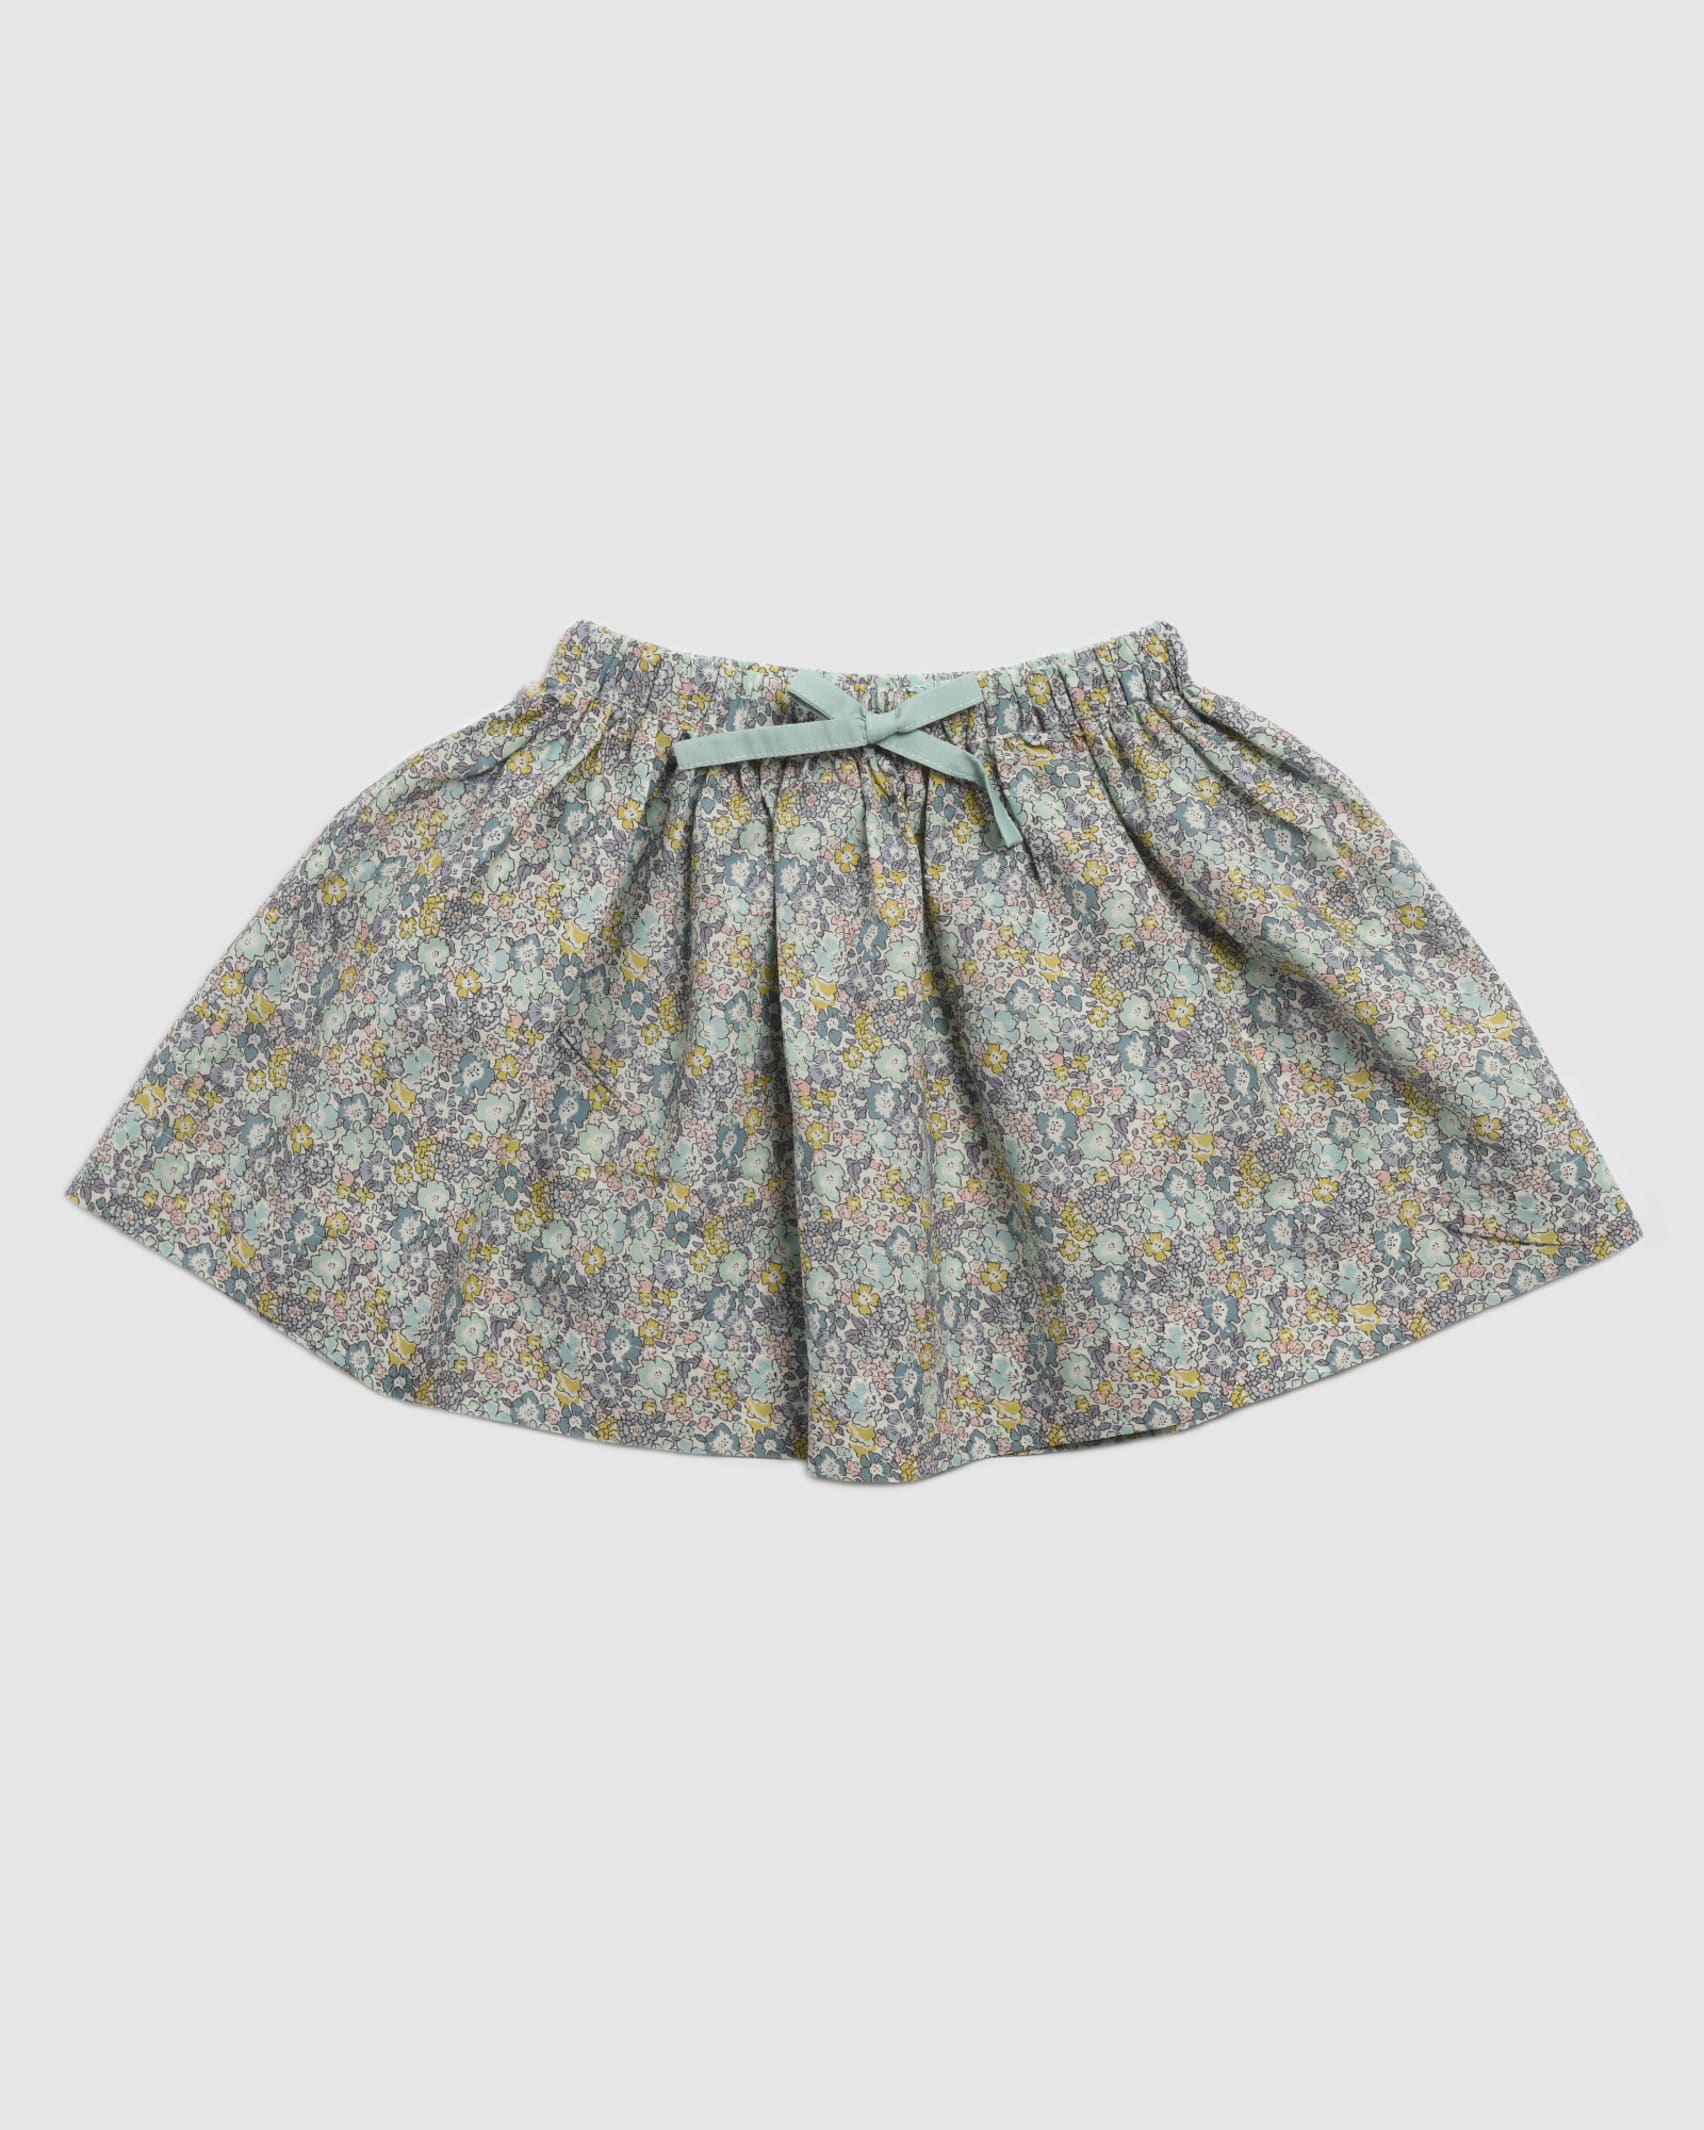 Mish Liberty Cotton Skirt in BLUE MULTI